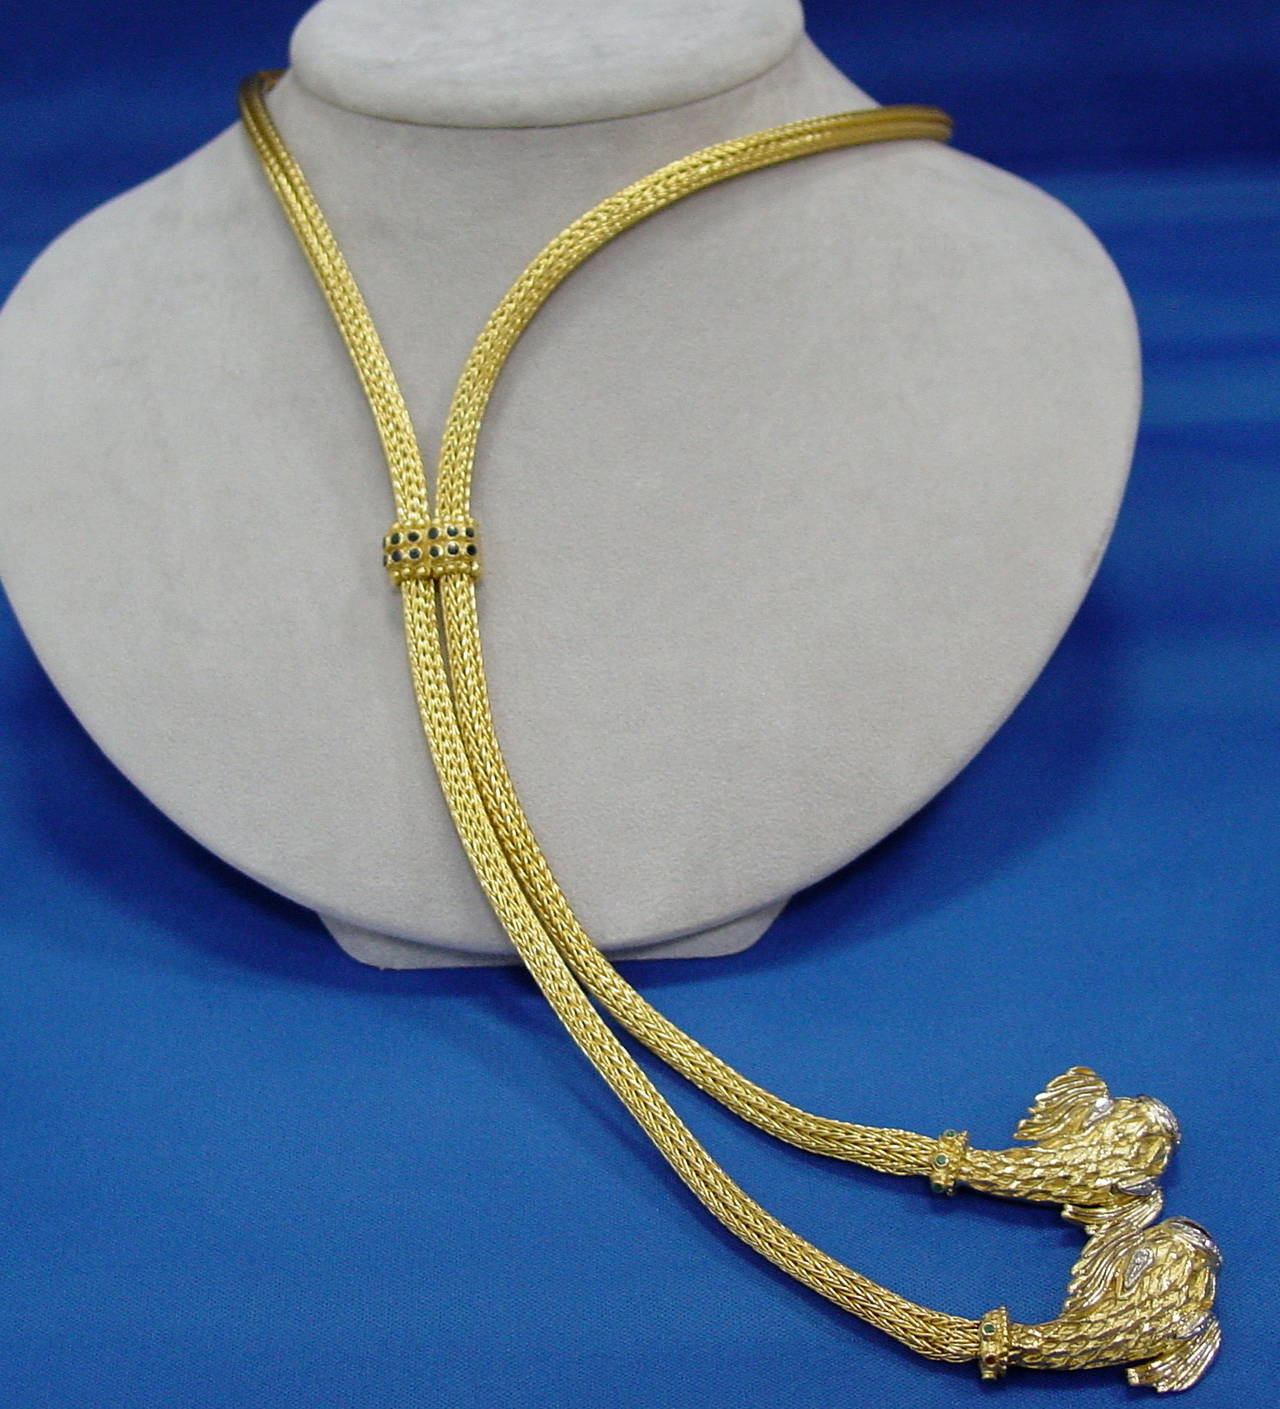 An I8 karat yellow gold braided lariat necklace by Ilias Lalaounis  terminating in two classical sea creatures studded with diamonds and emerald collars. The adjustable slide is set with two rows of sapphires and is signed Lalounis with maker's